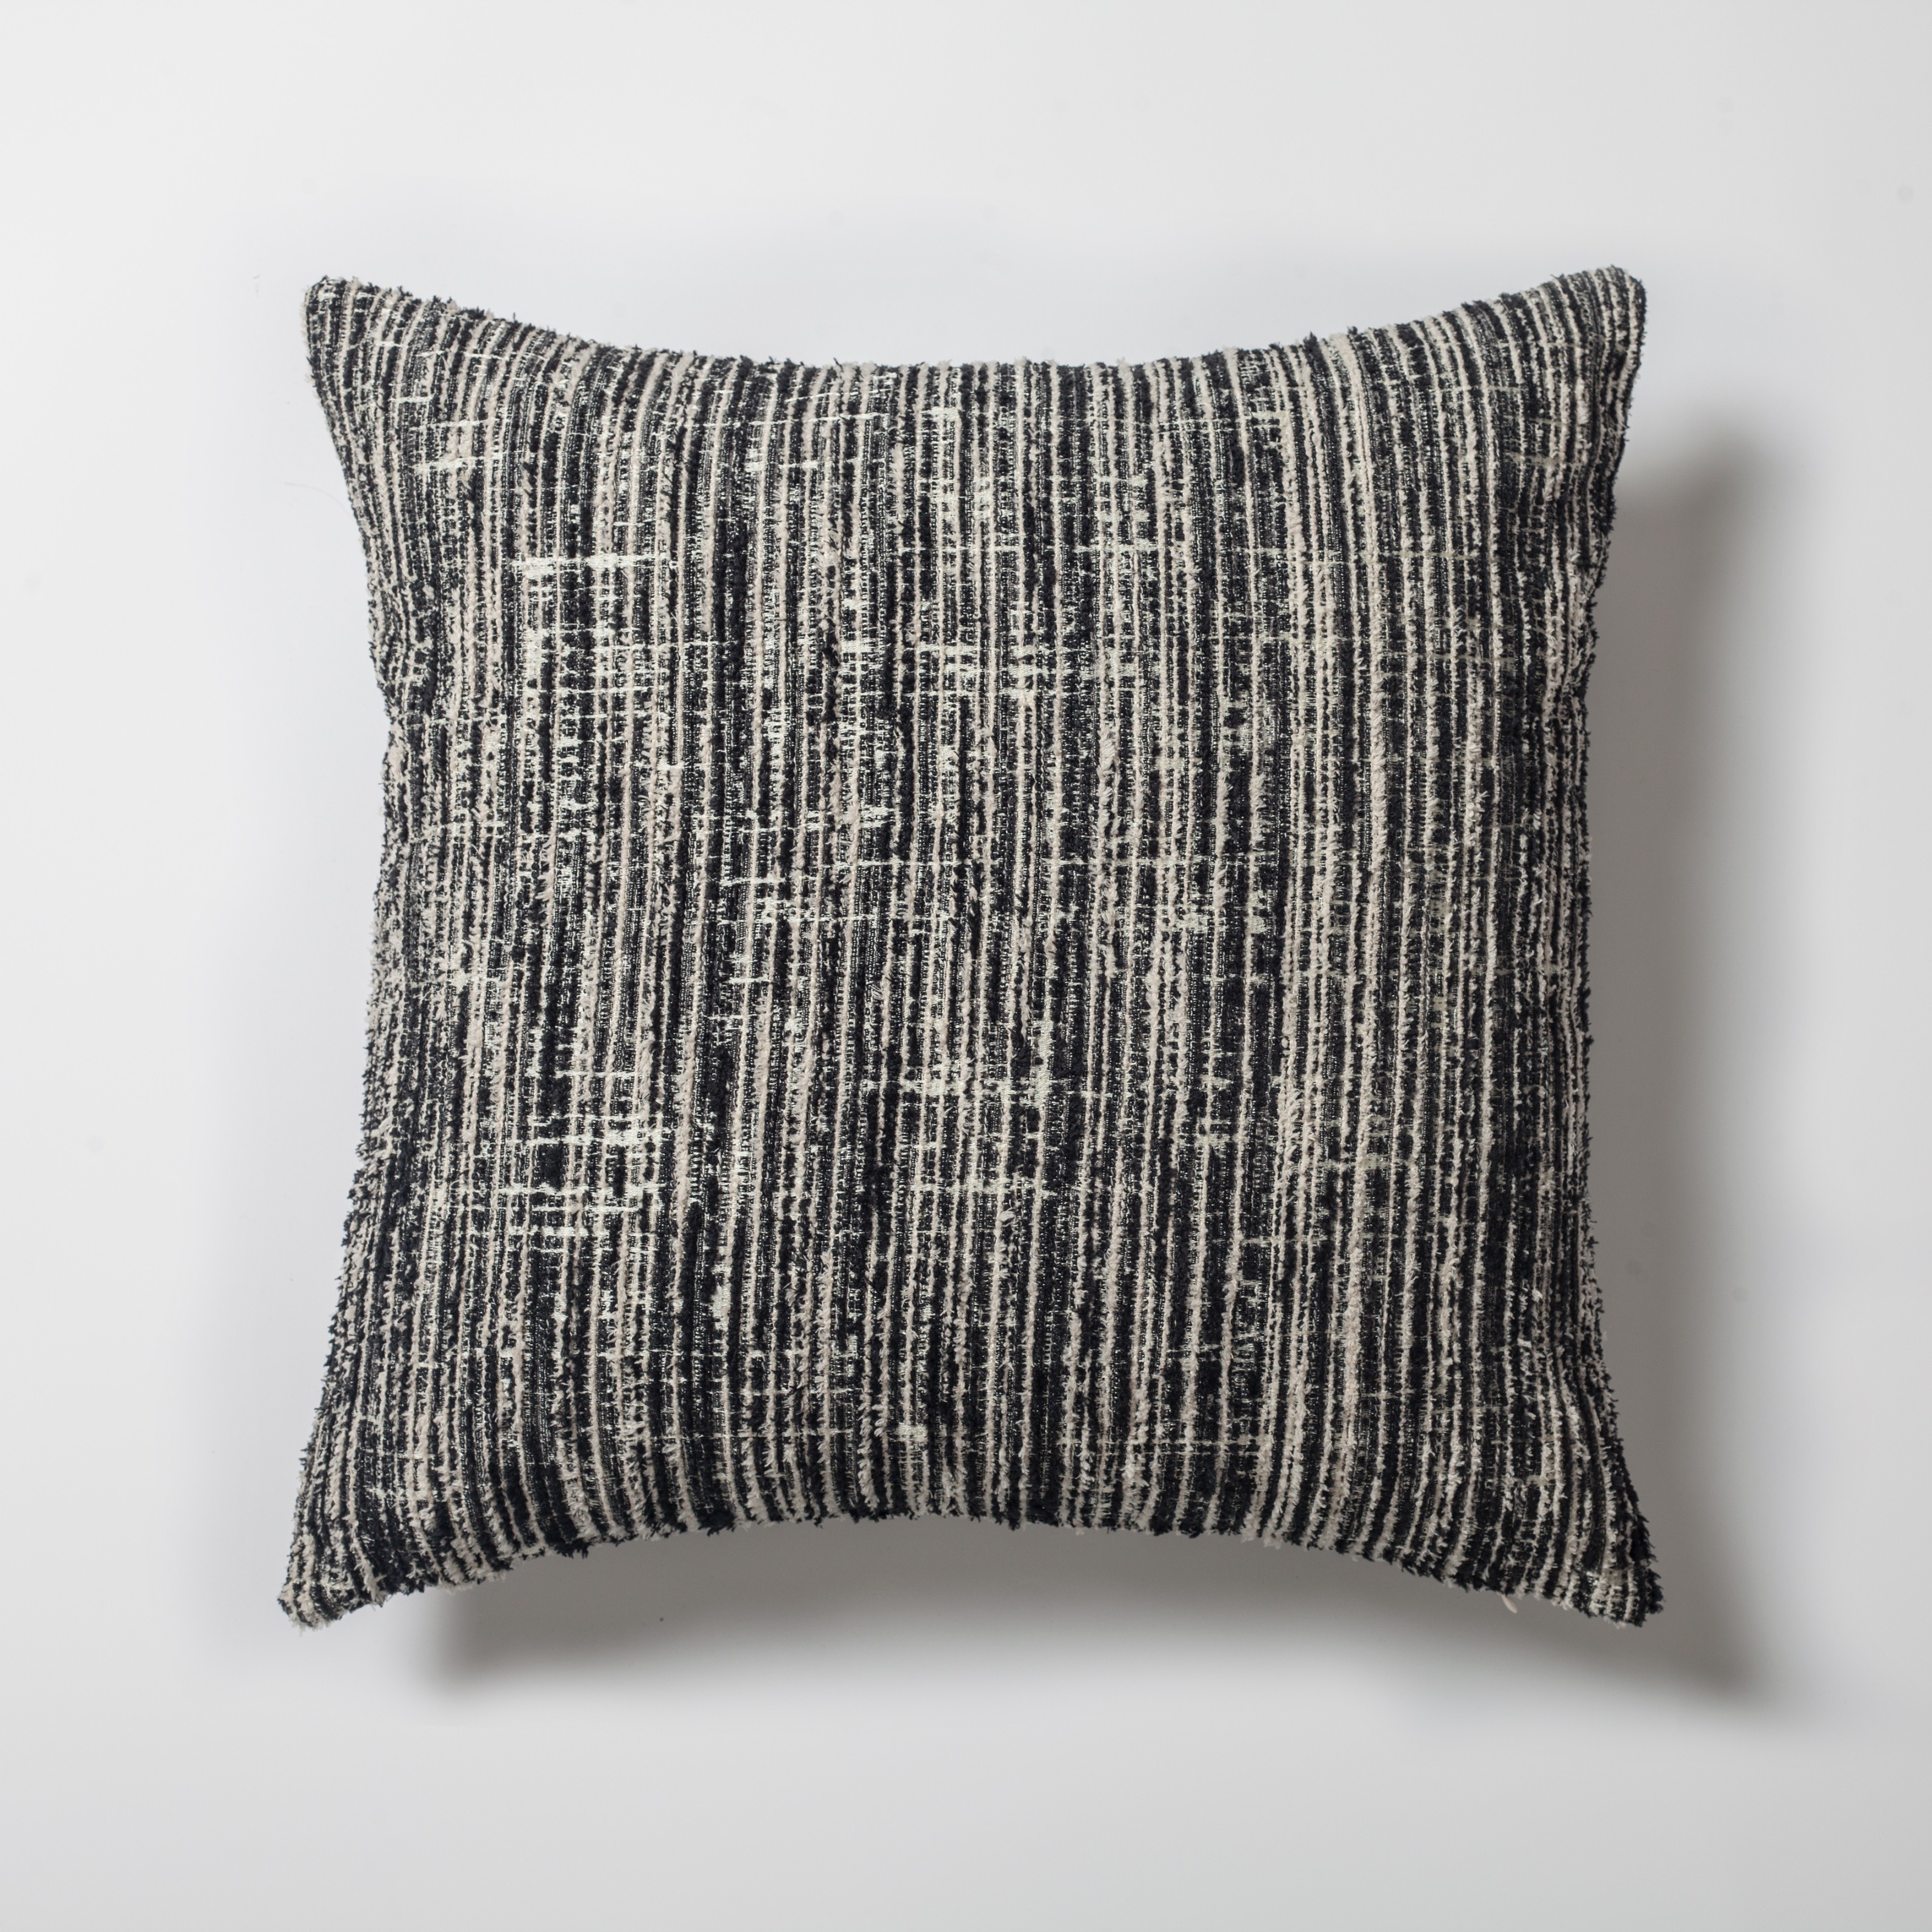 "Coco" - Corduroy Patterned Cushion 20x20 Inch - Black (Cover Only)